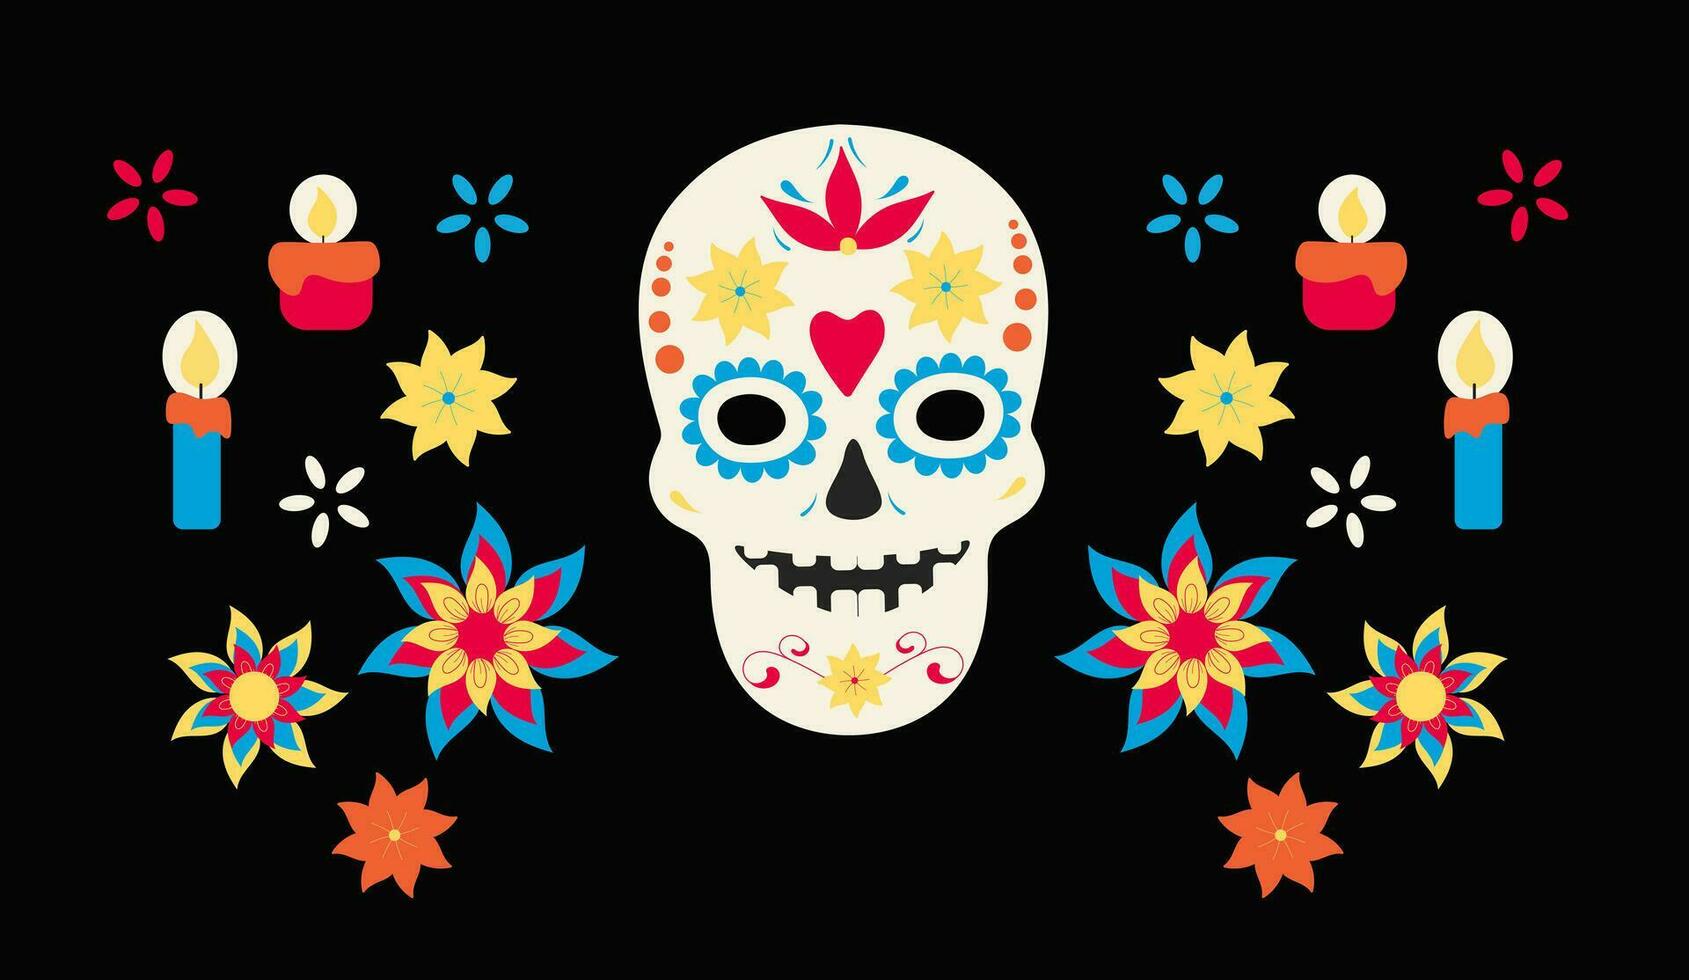 Day of the Dead in Mexico. Elements for design. Vector illustration for sticker, print, card, poster or banner.